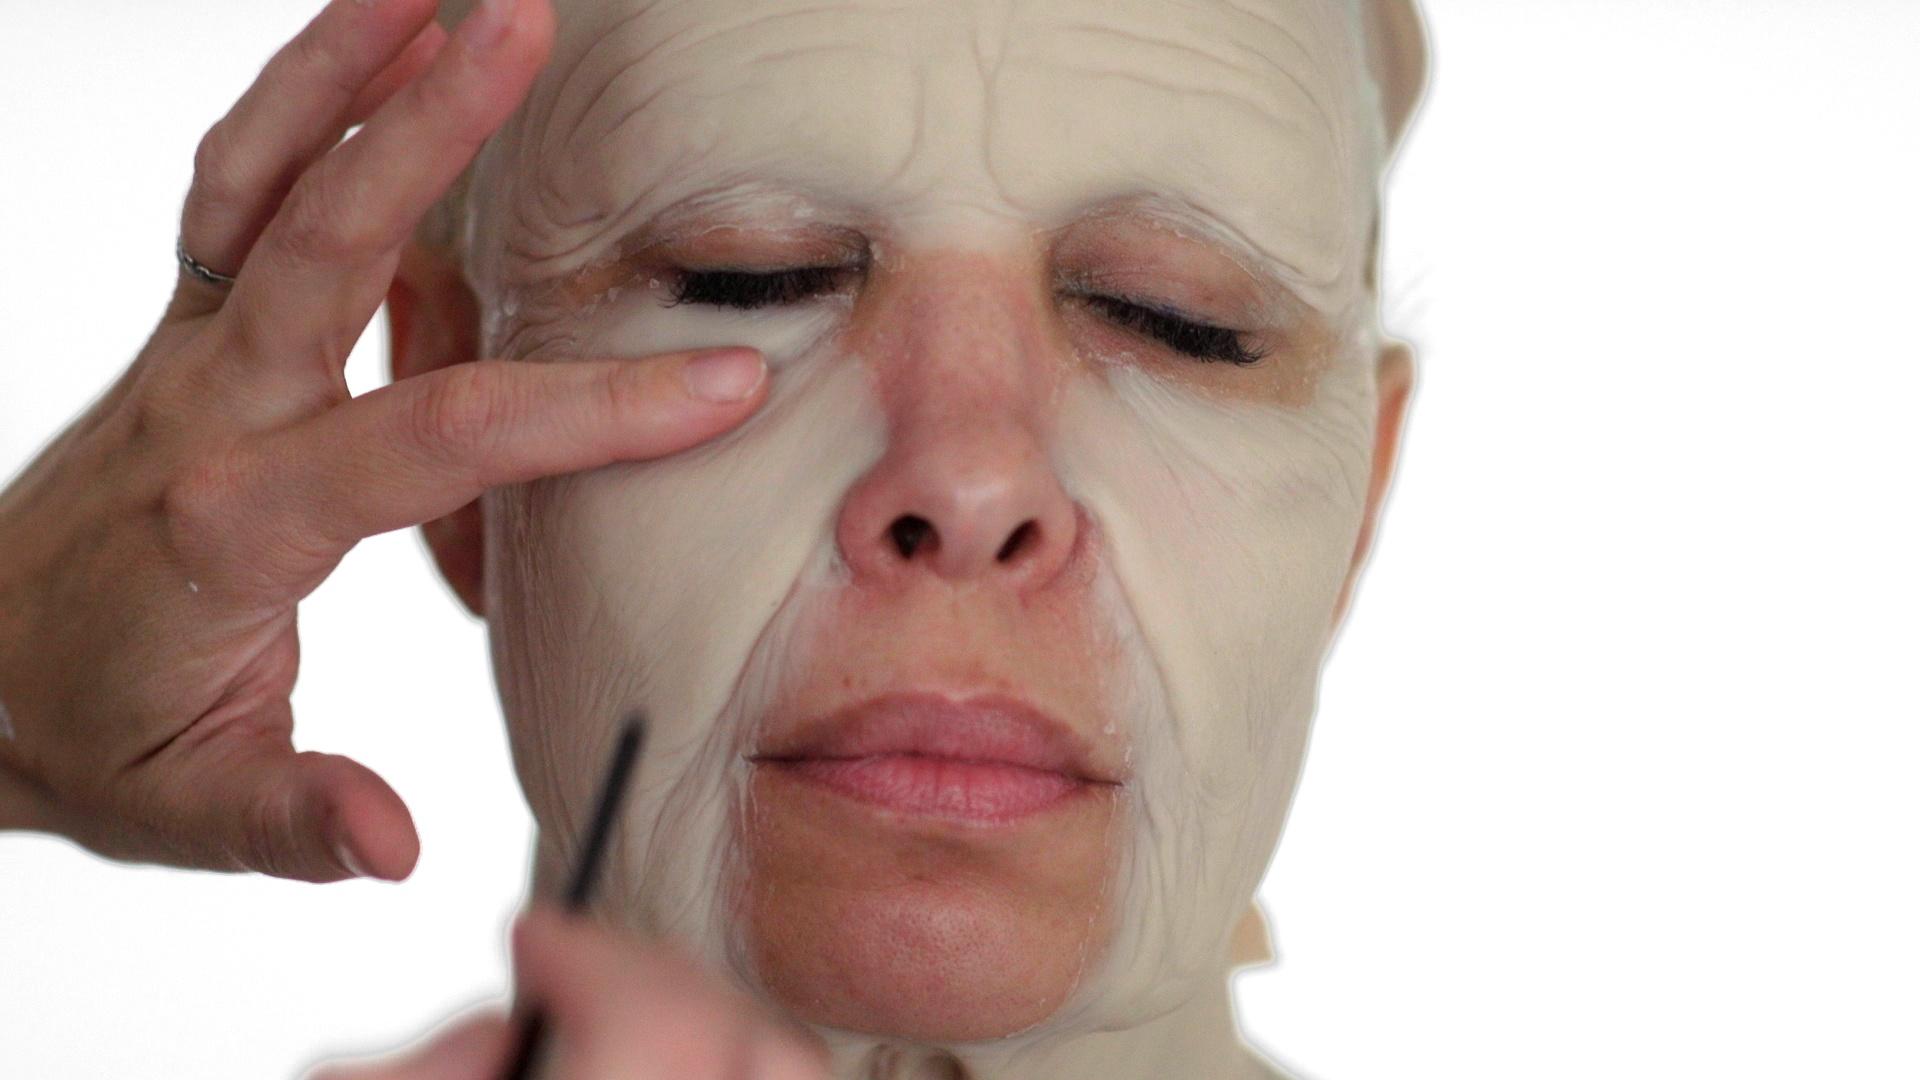 With the help of prosthetics and make-up, Carol is transformed into her 80 year-old self.